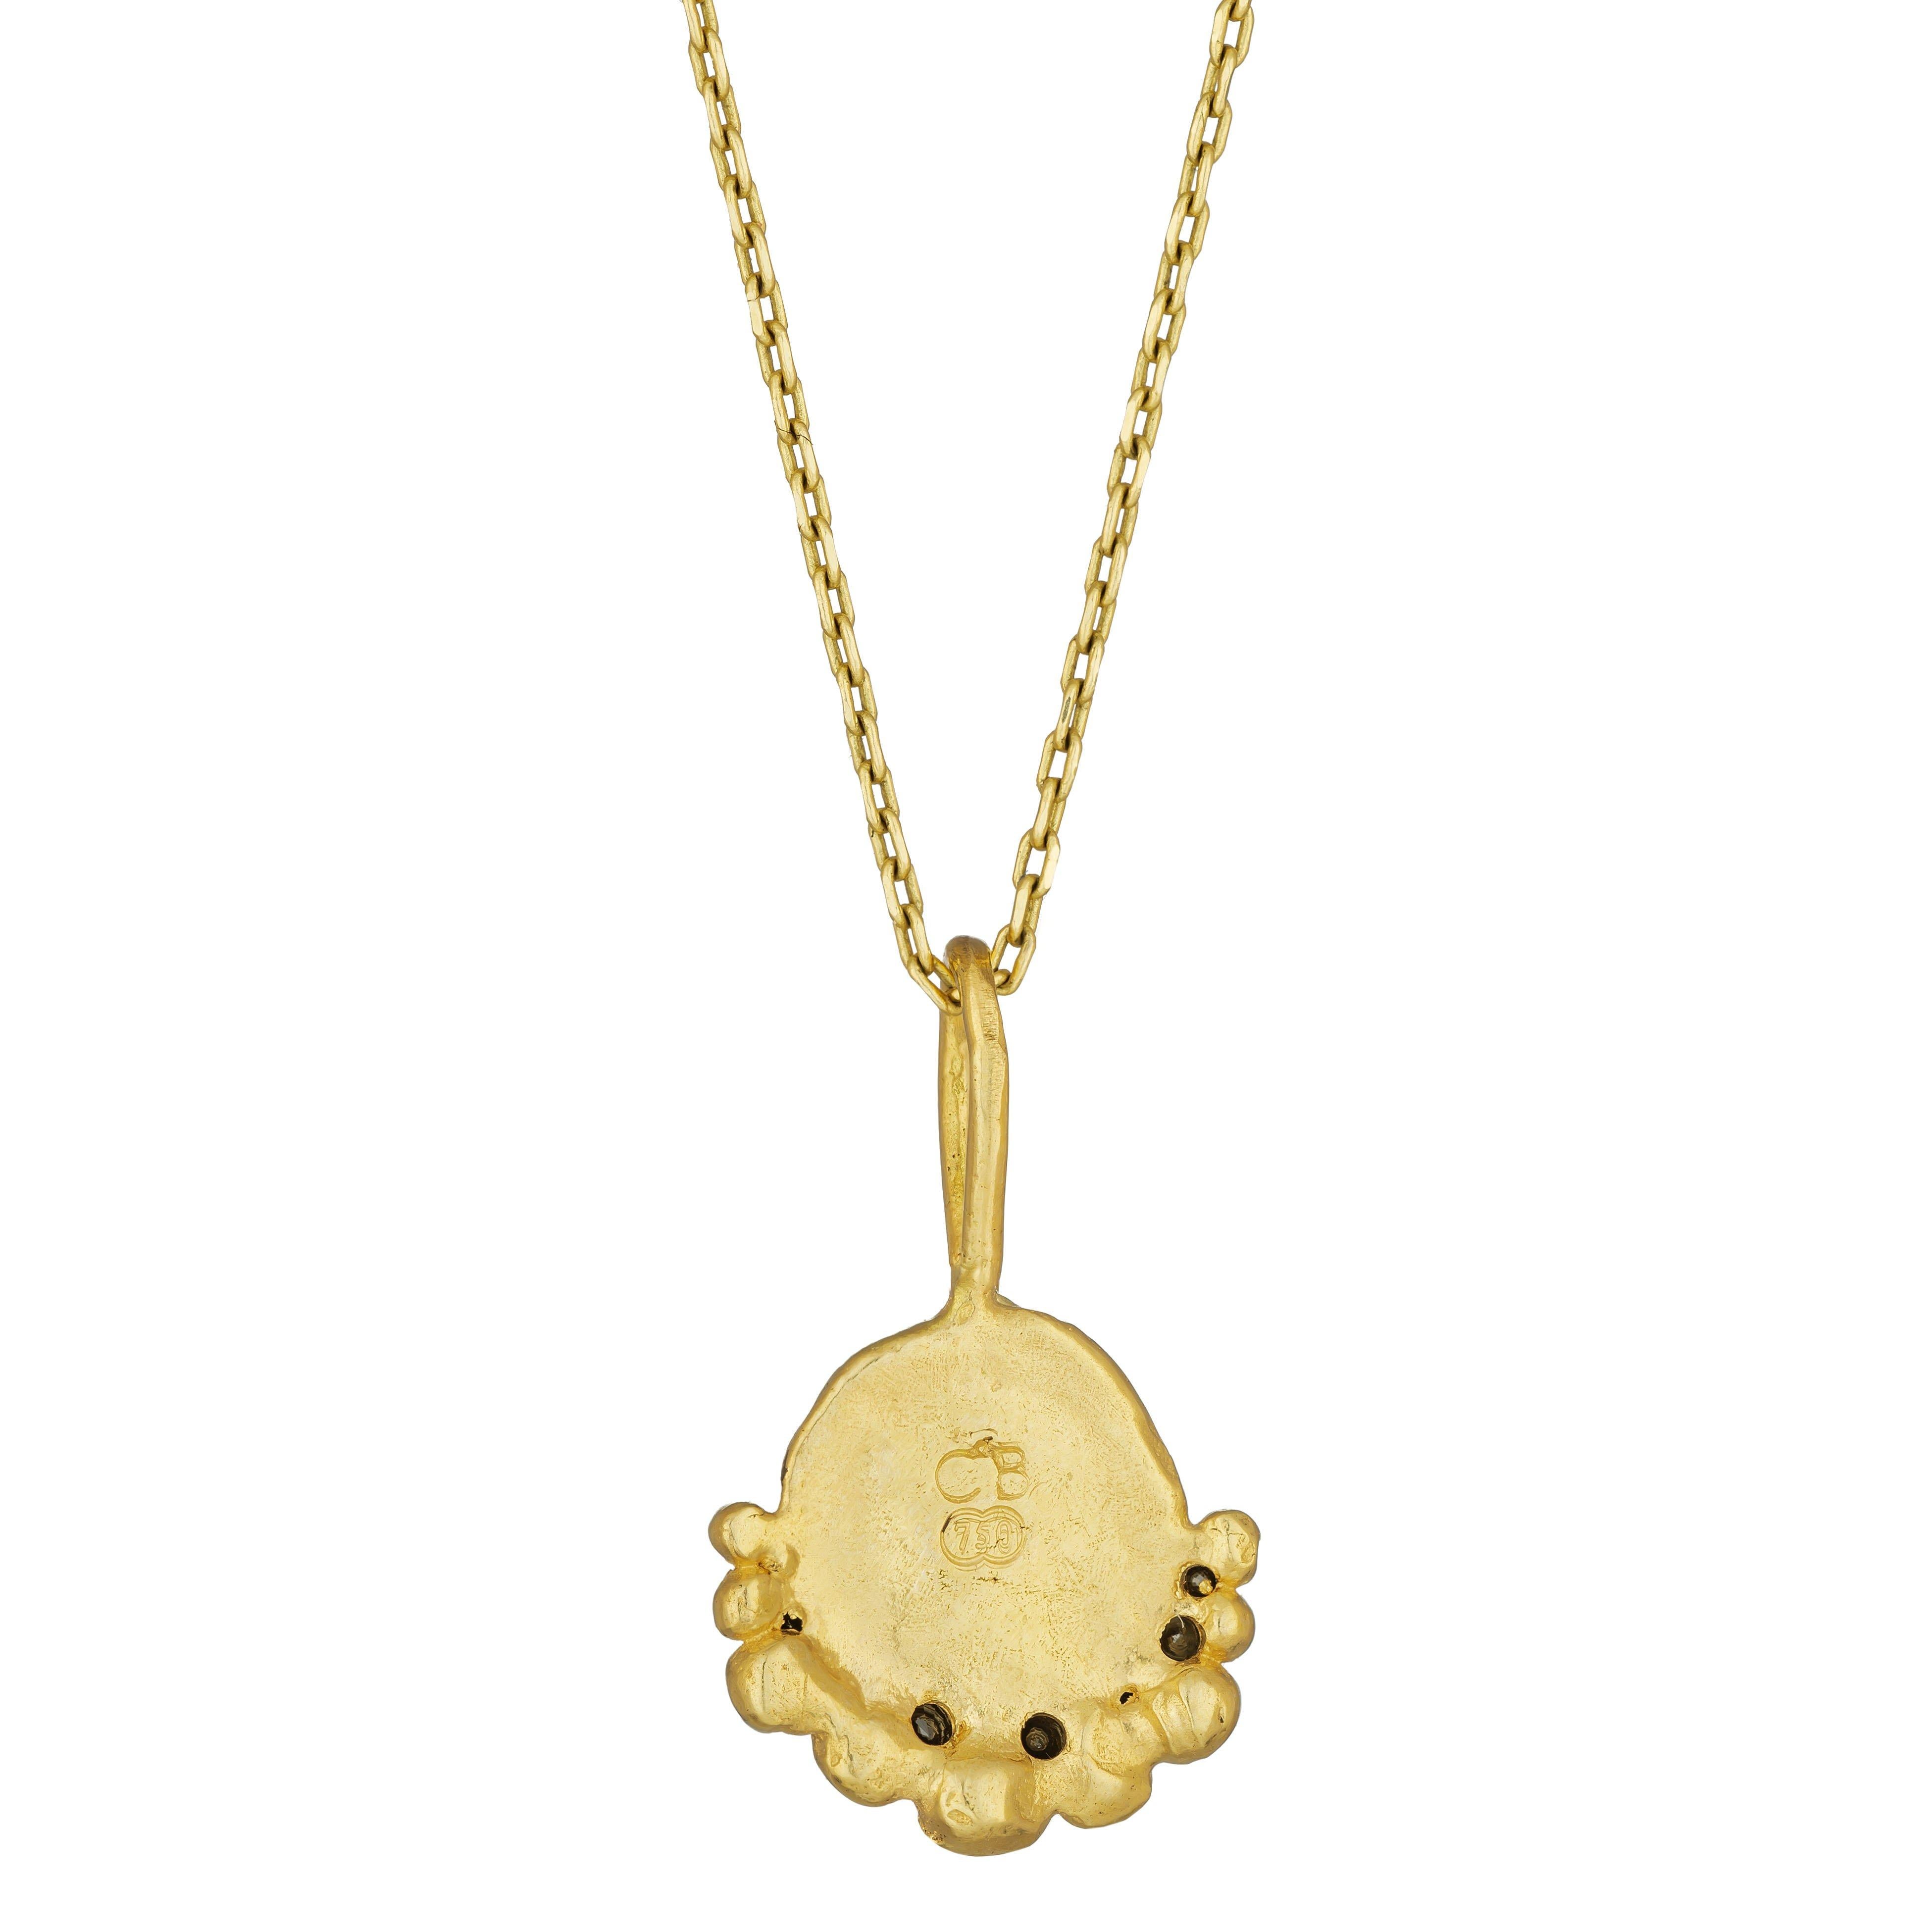 Gorgoneion Radiance Pendant with Black Diamonds, 18 Karat Yellow Gold
Handcrafted and individually cast in 18-karat solid yellow gold. Olivia carves each piece from wax, making these pendants unique, which we believe is what gives them their beauty.